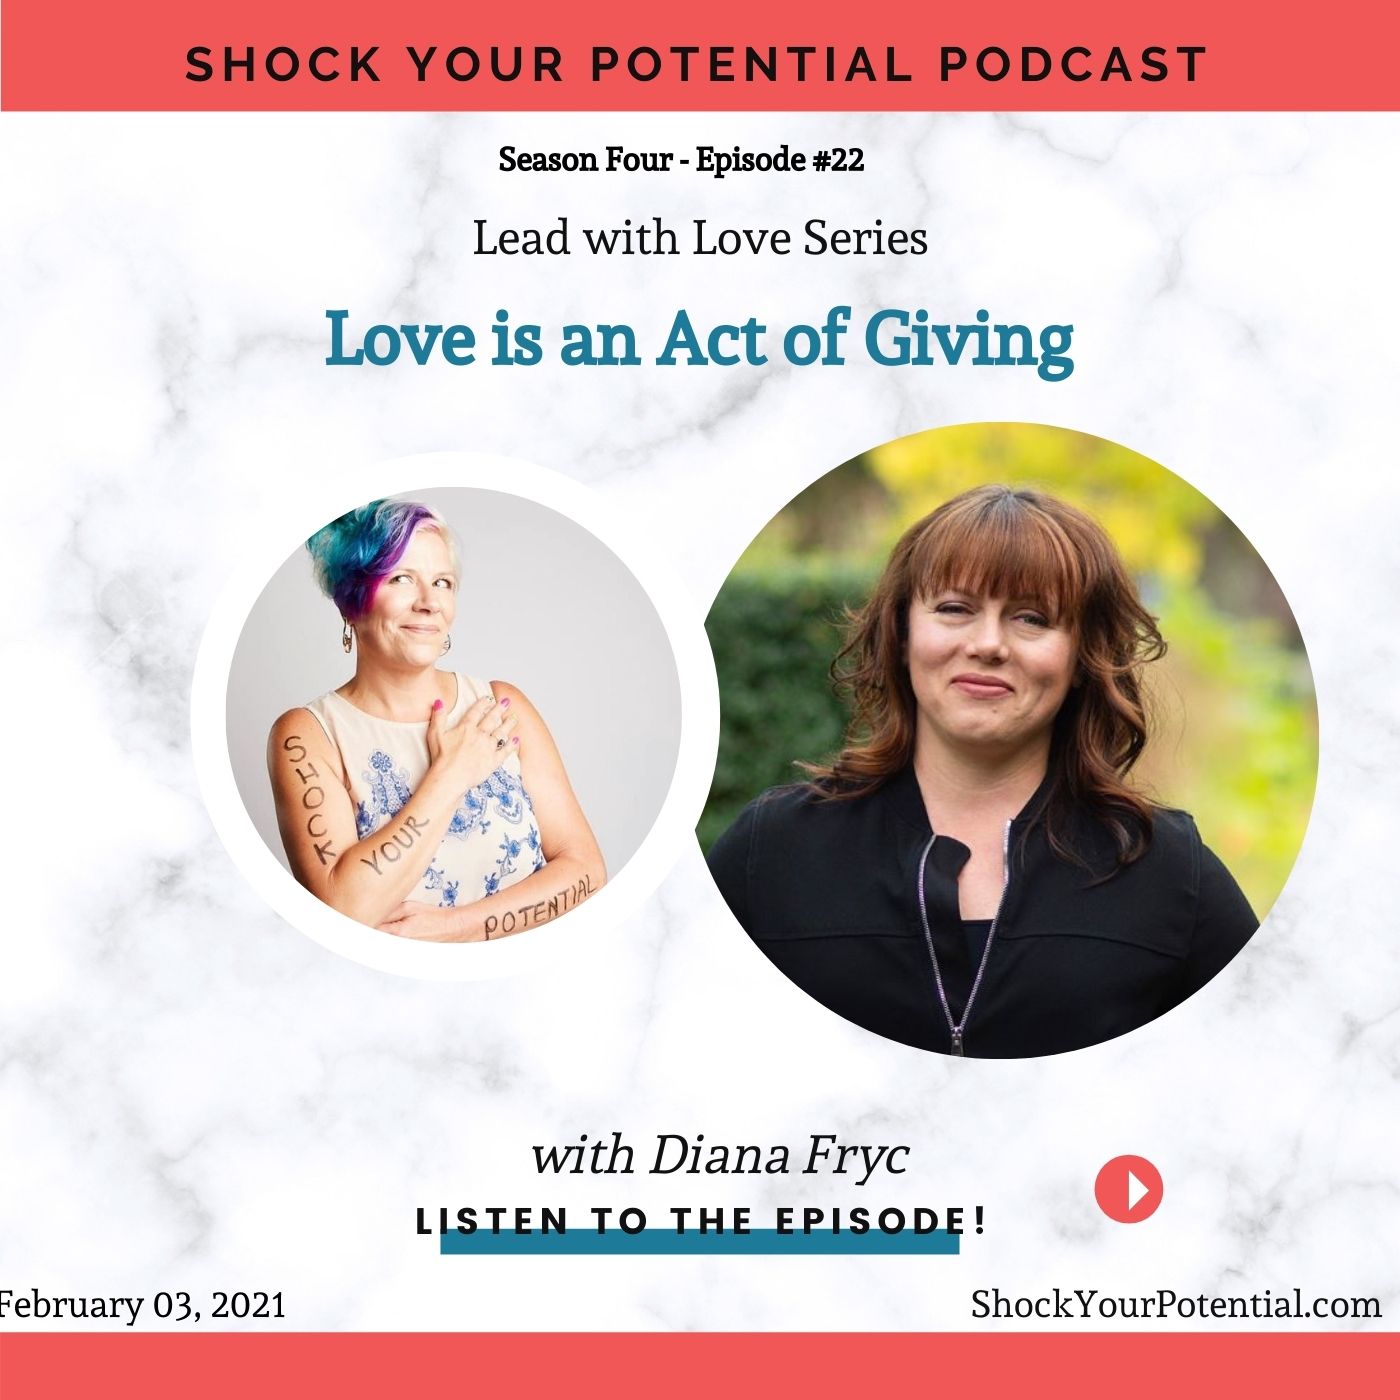 Love is an Act of Giving – Diana Fryc